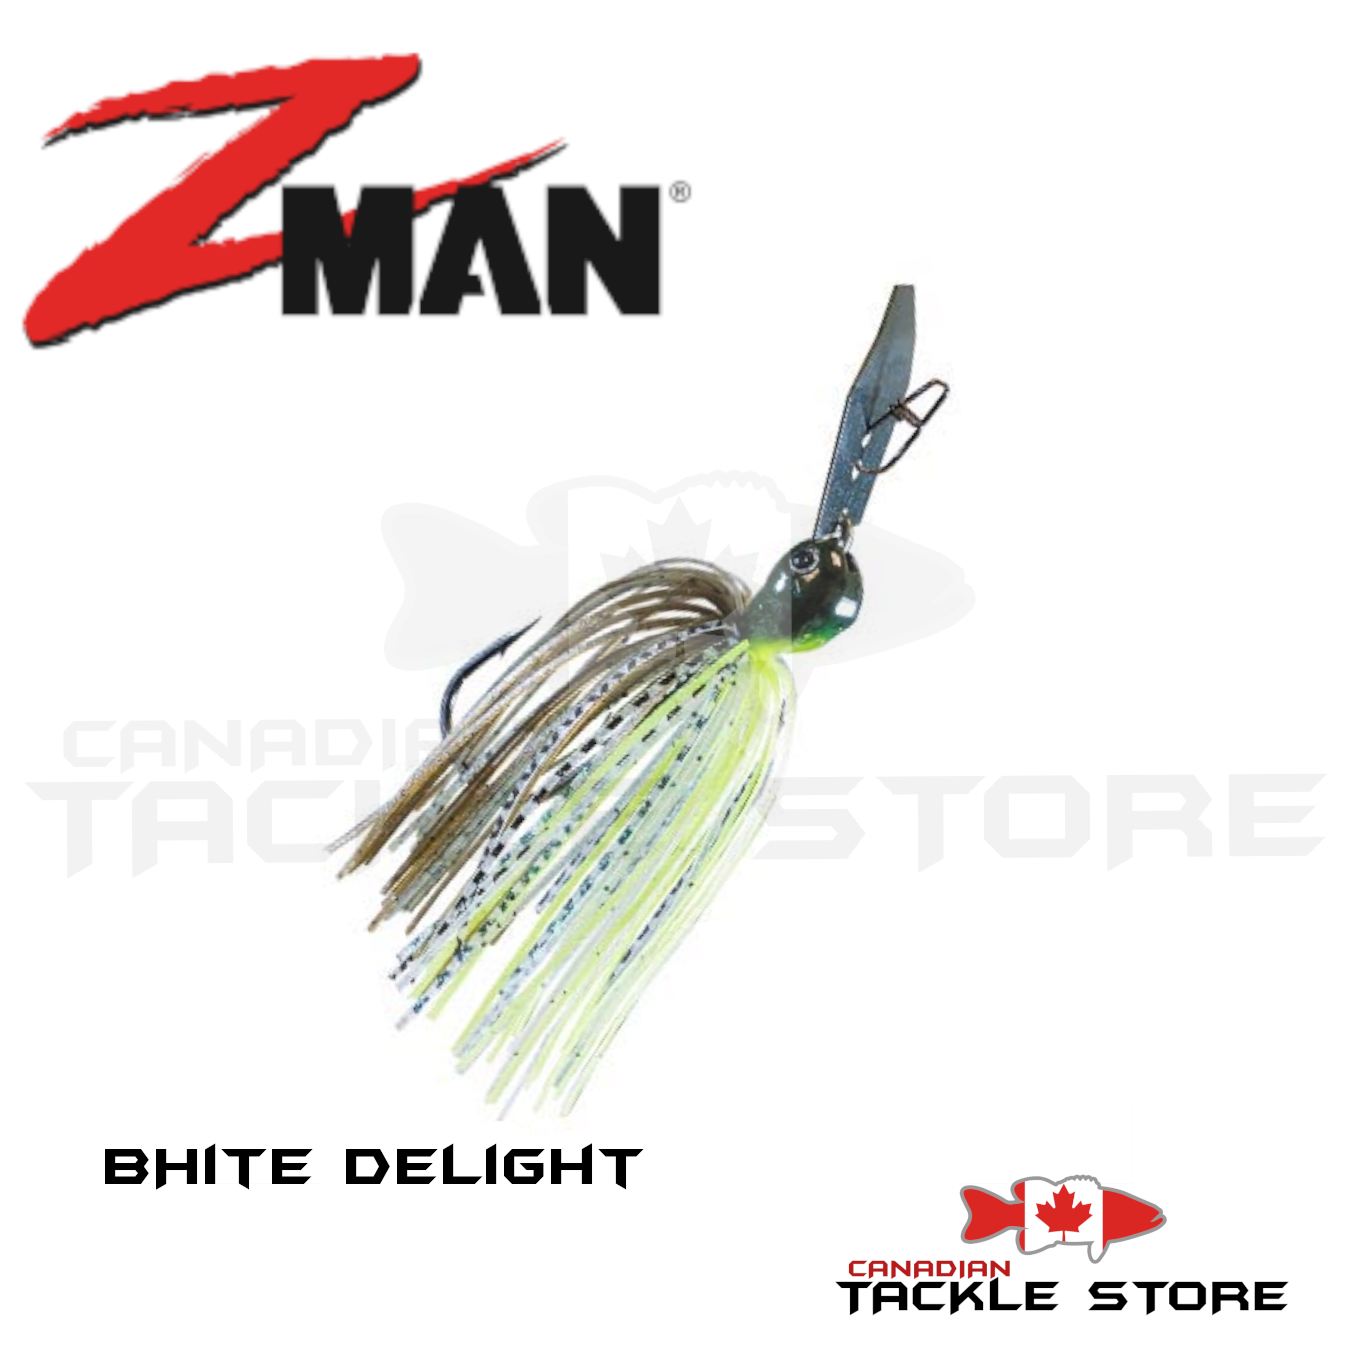 Chatterbaits for zander, proven models at a glance